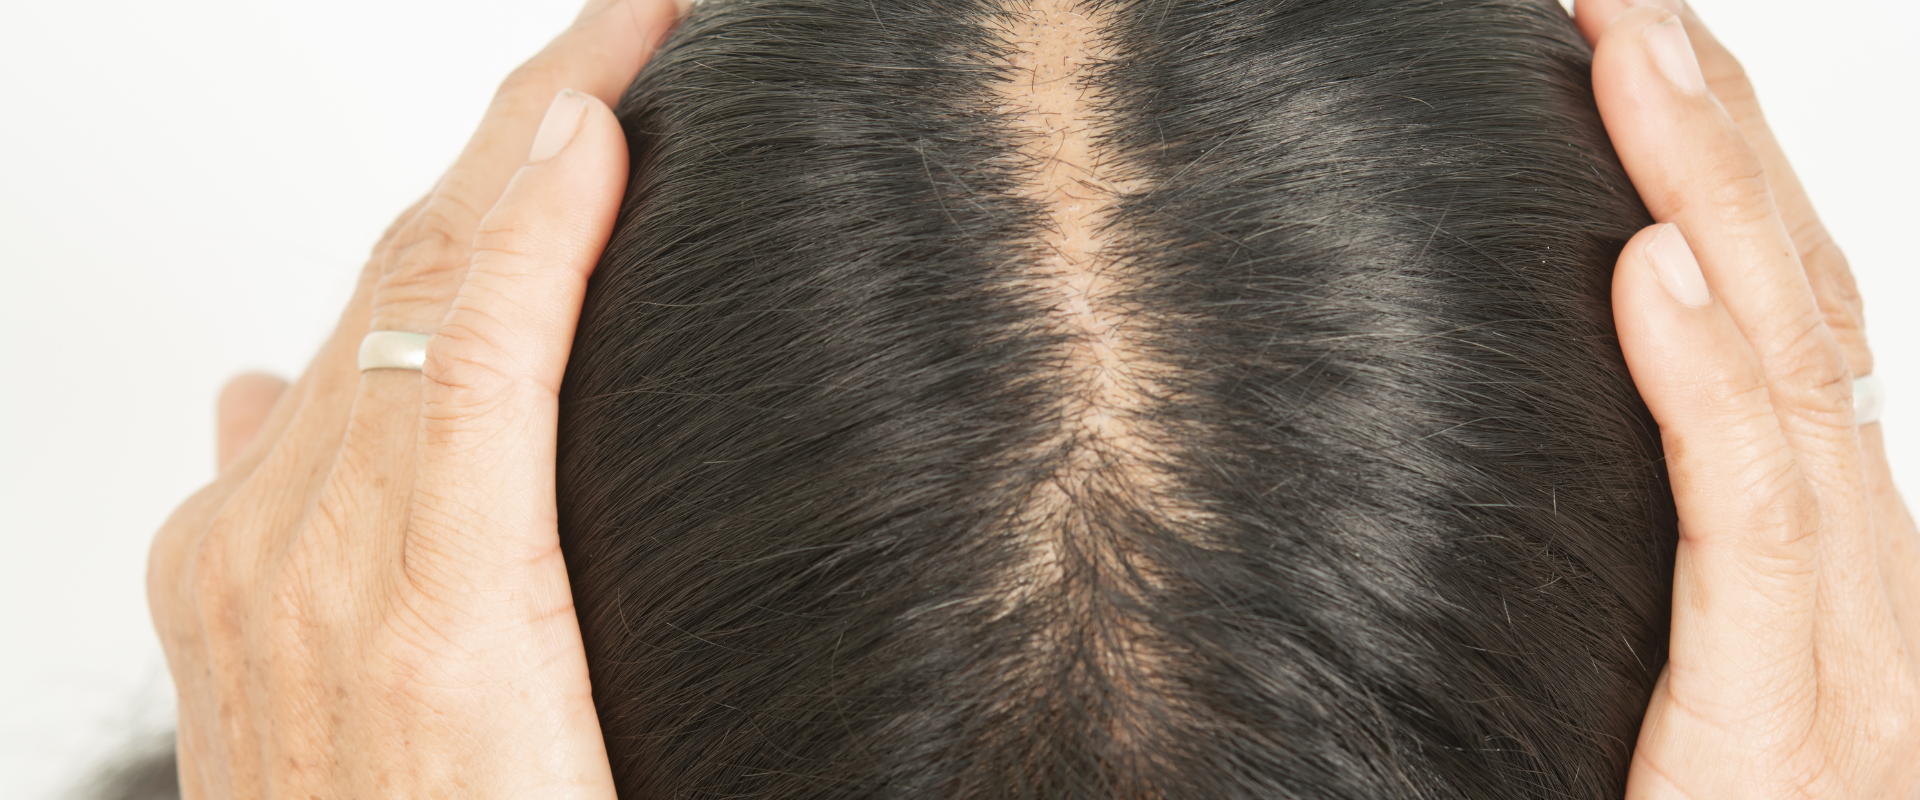 How to combat dry, thinning hair